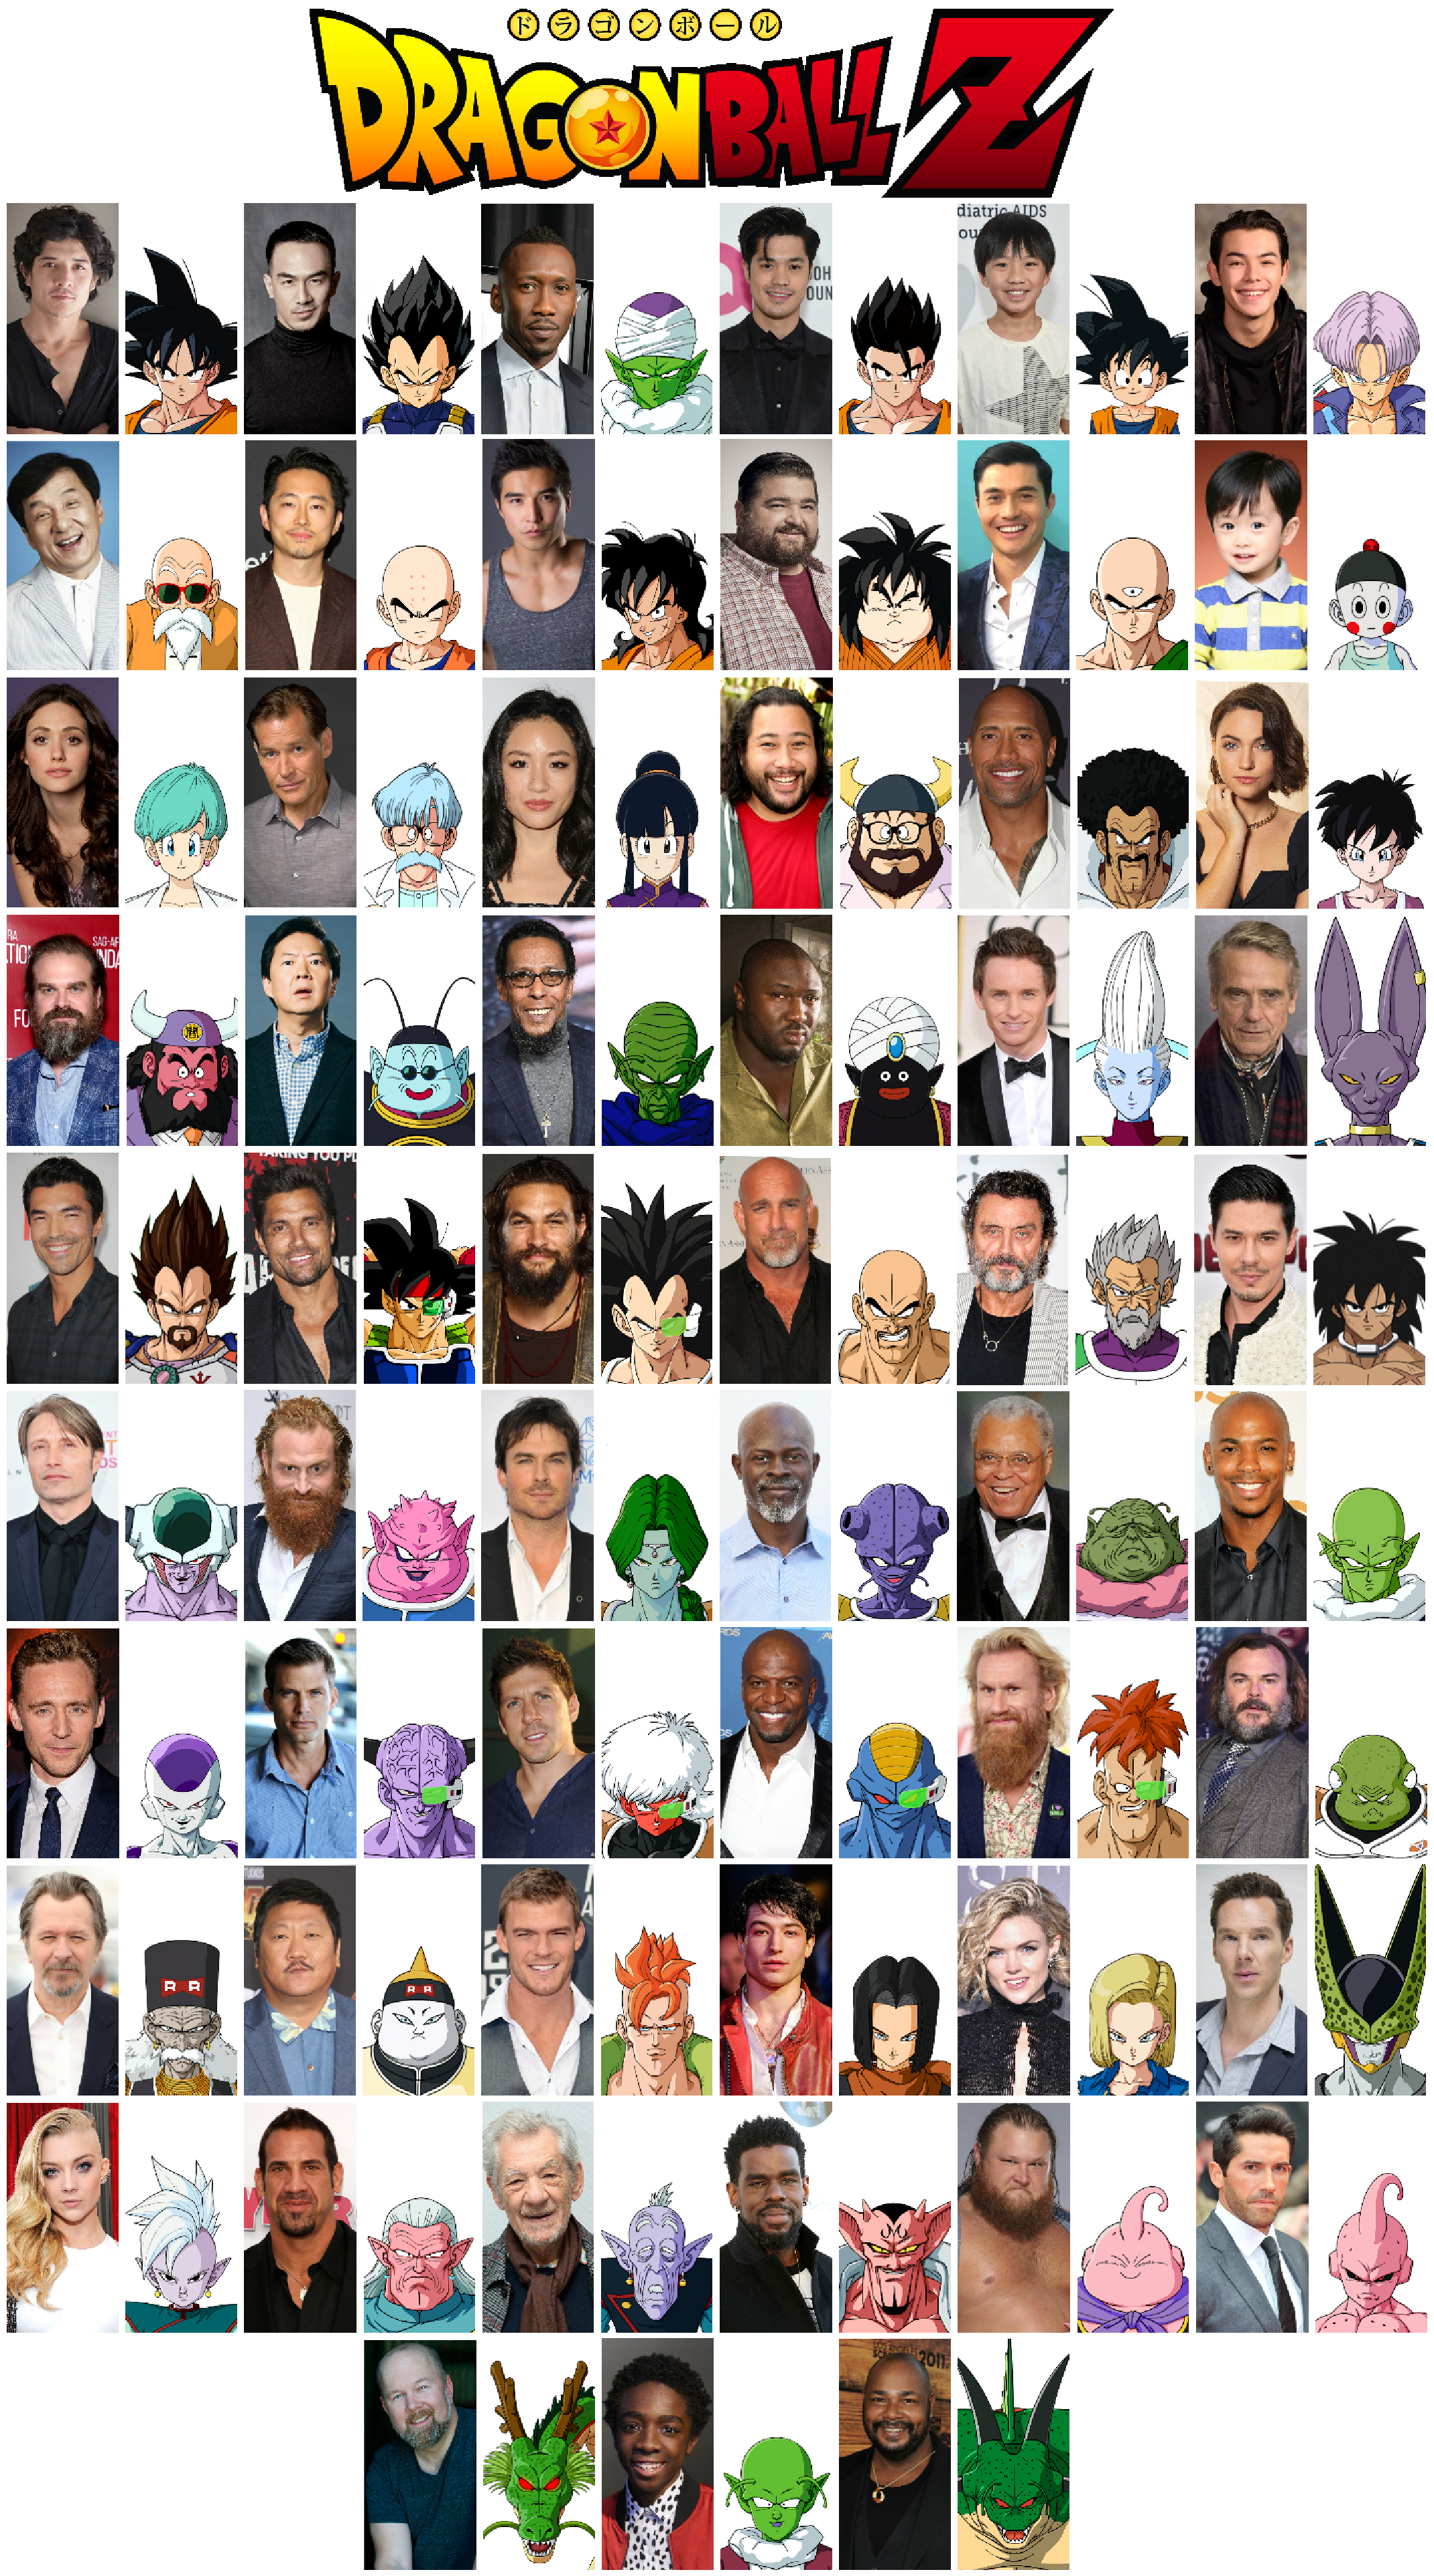 Dragon Ball Super x One Piece Crossover Fan Casting on myCast